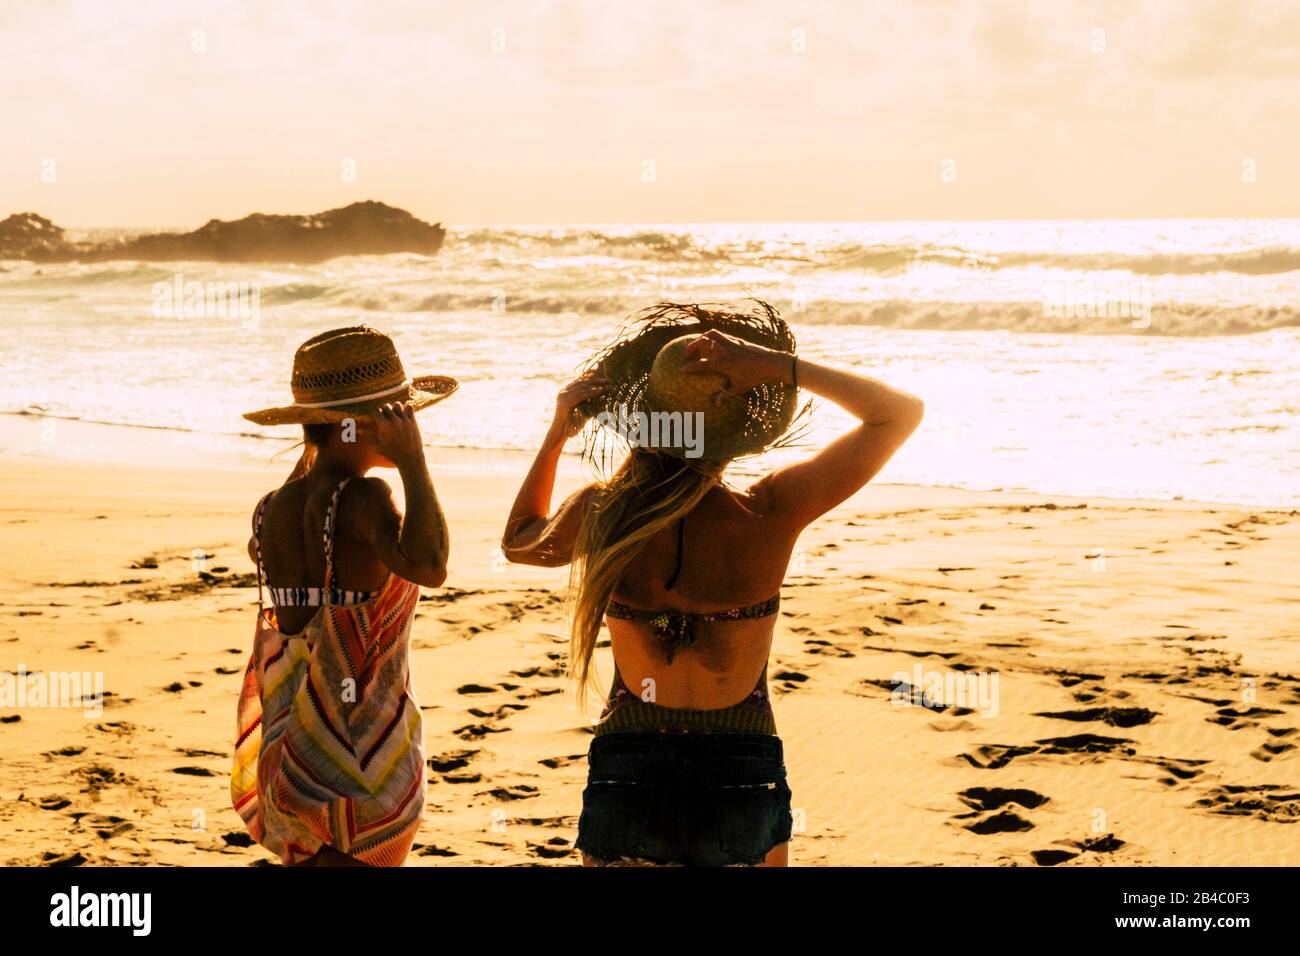 Sunset light at the beach with people enjoying the outdoor holiday vacation leisure - couple of women friends enjoying the nature in tropical scenic place - golden colors and freedom concept Stock Photo